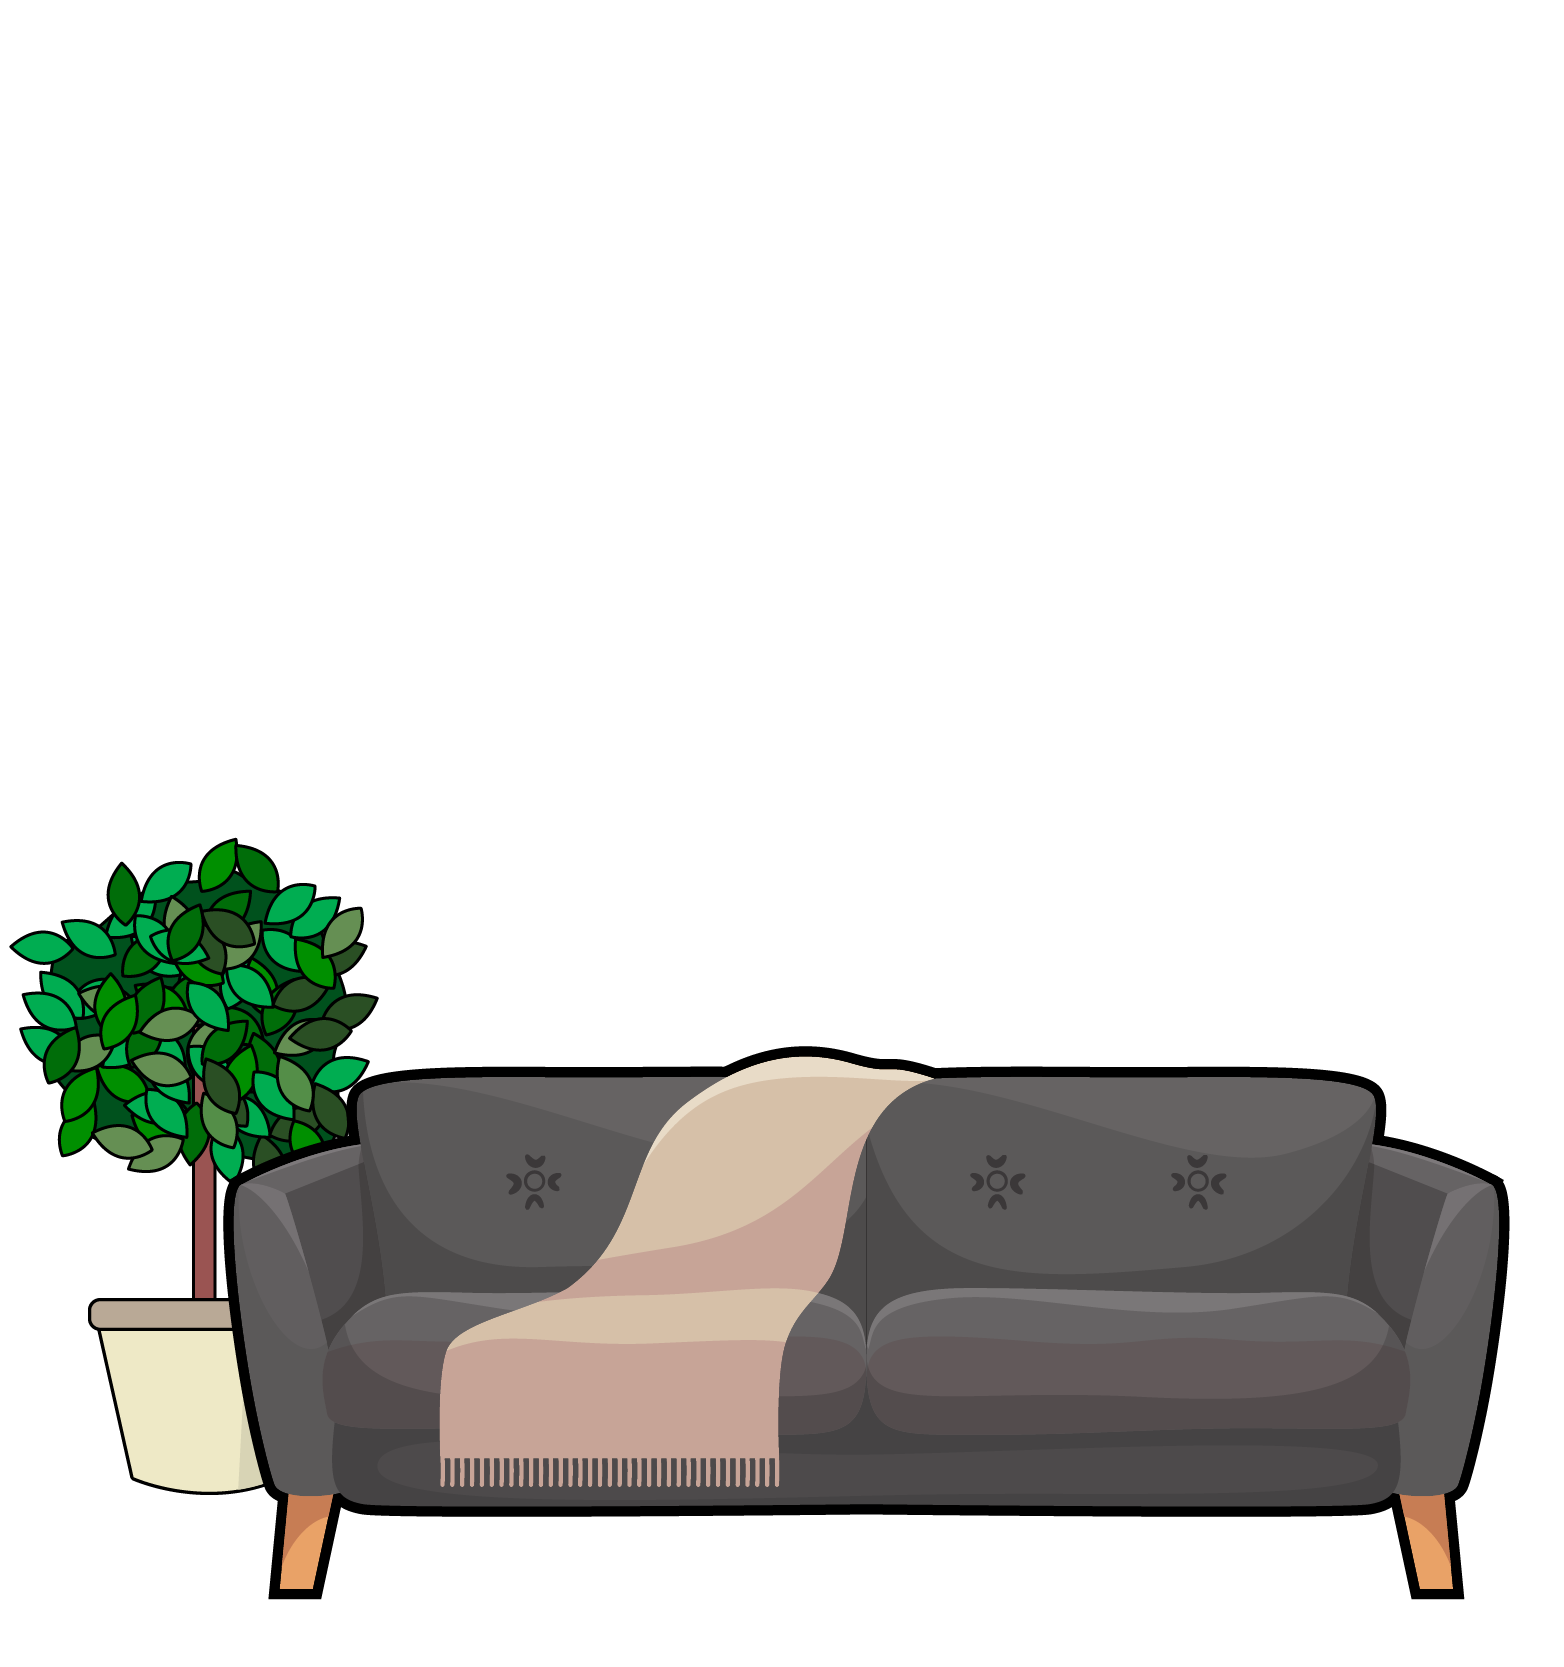 Malcolm's living room, featuring a sofa and a plant to the left of it